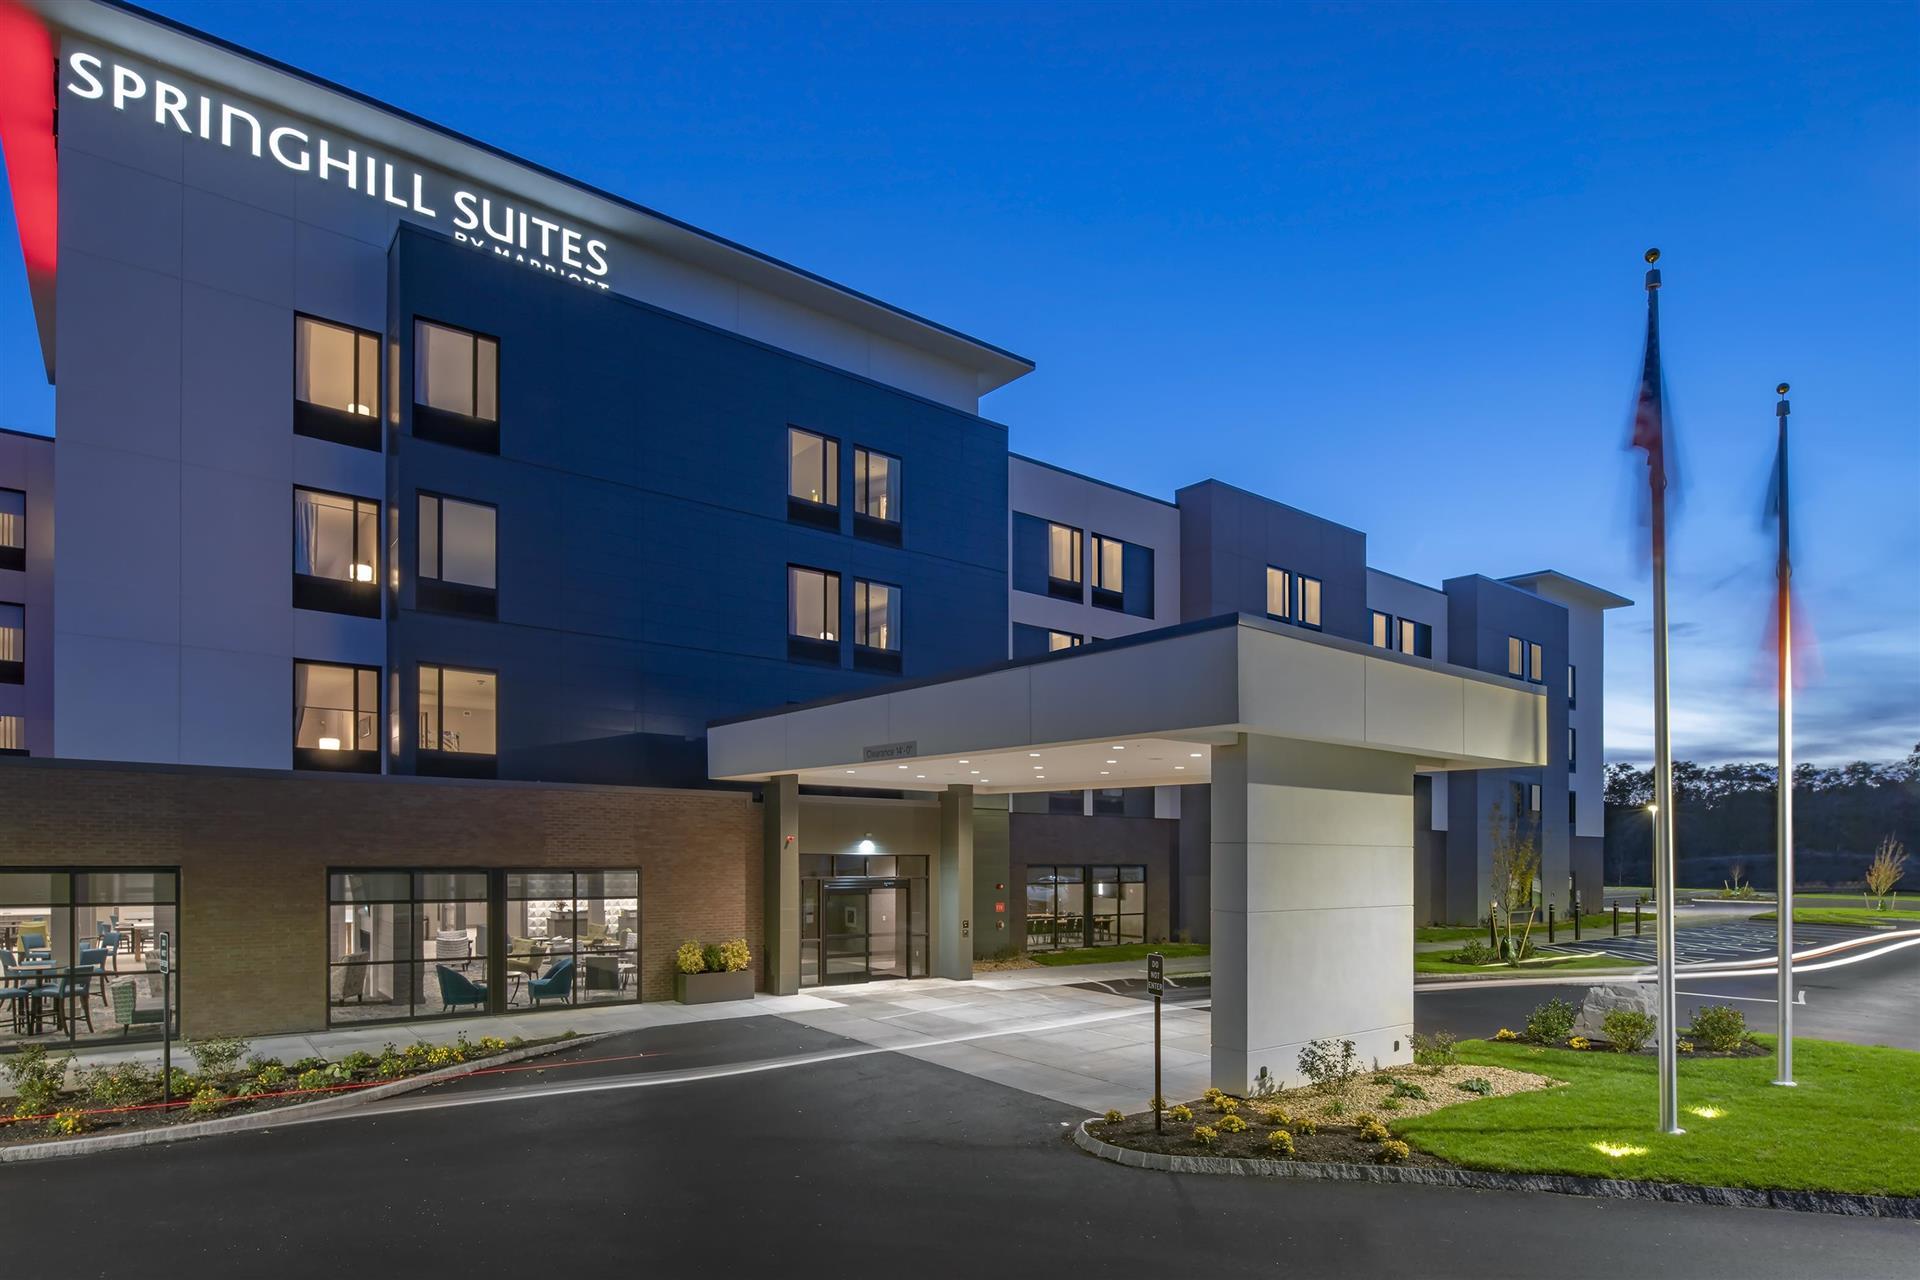 SpringHill Suites Wrentham Plainville in Wrentham, MA